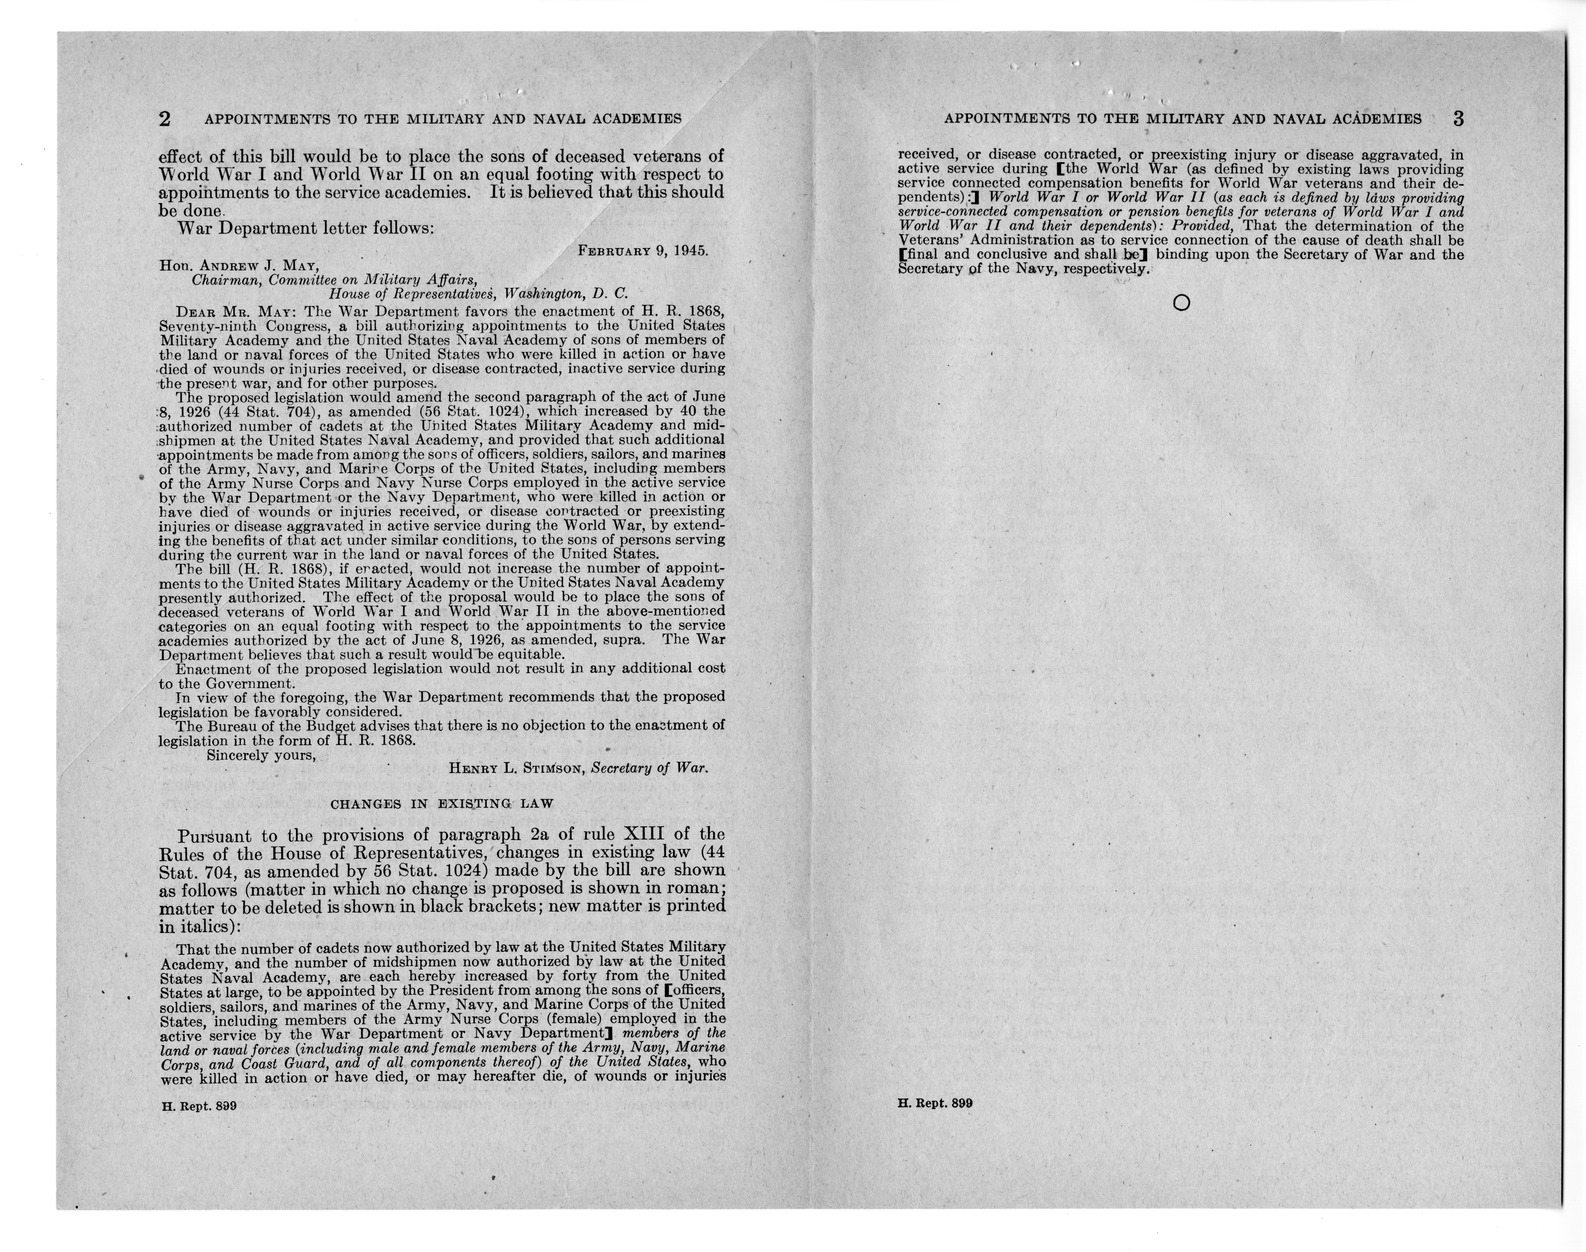 Memorandum from Frederick J. Bailey to M. C. Latta, H.R. 1868, Authorizing Appointments to the United States Military Academy and the United States Naval Academy of Sons of Members of the Land or Naval Forces of the United States who were Killed in Action During the Present War, with Attachments